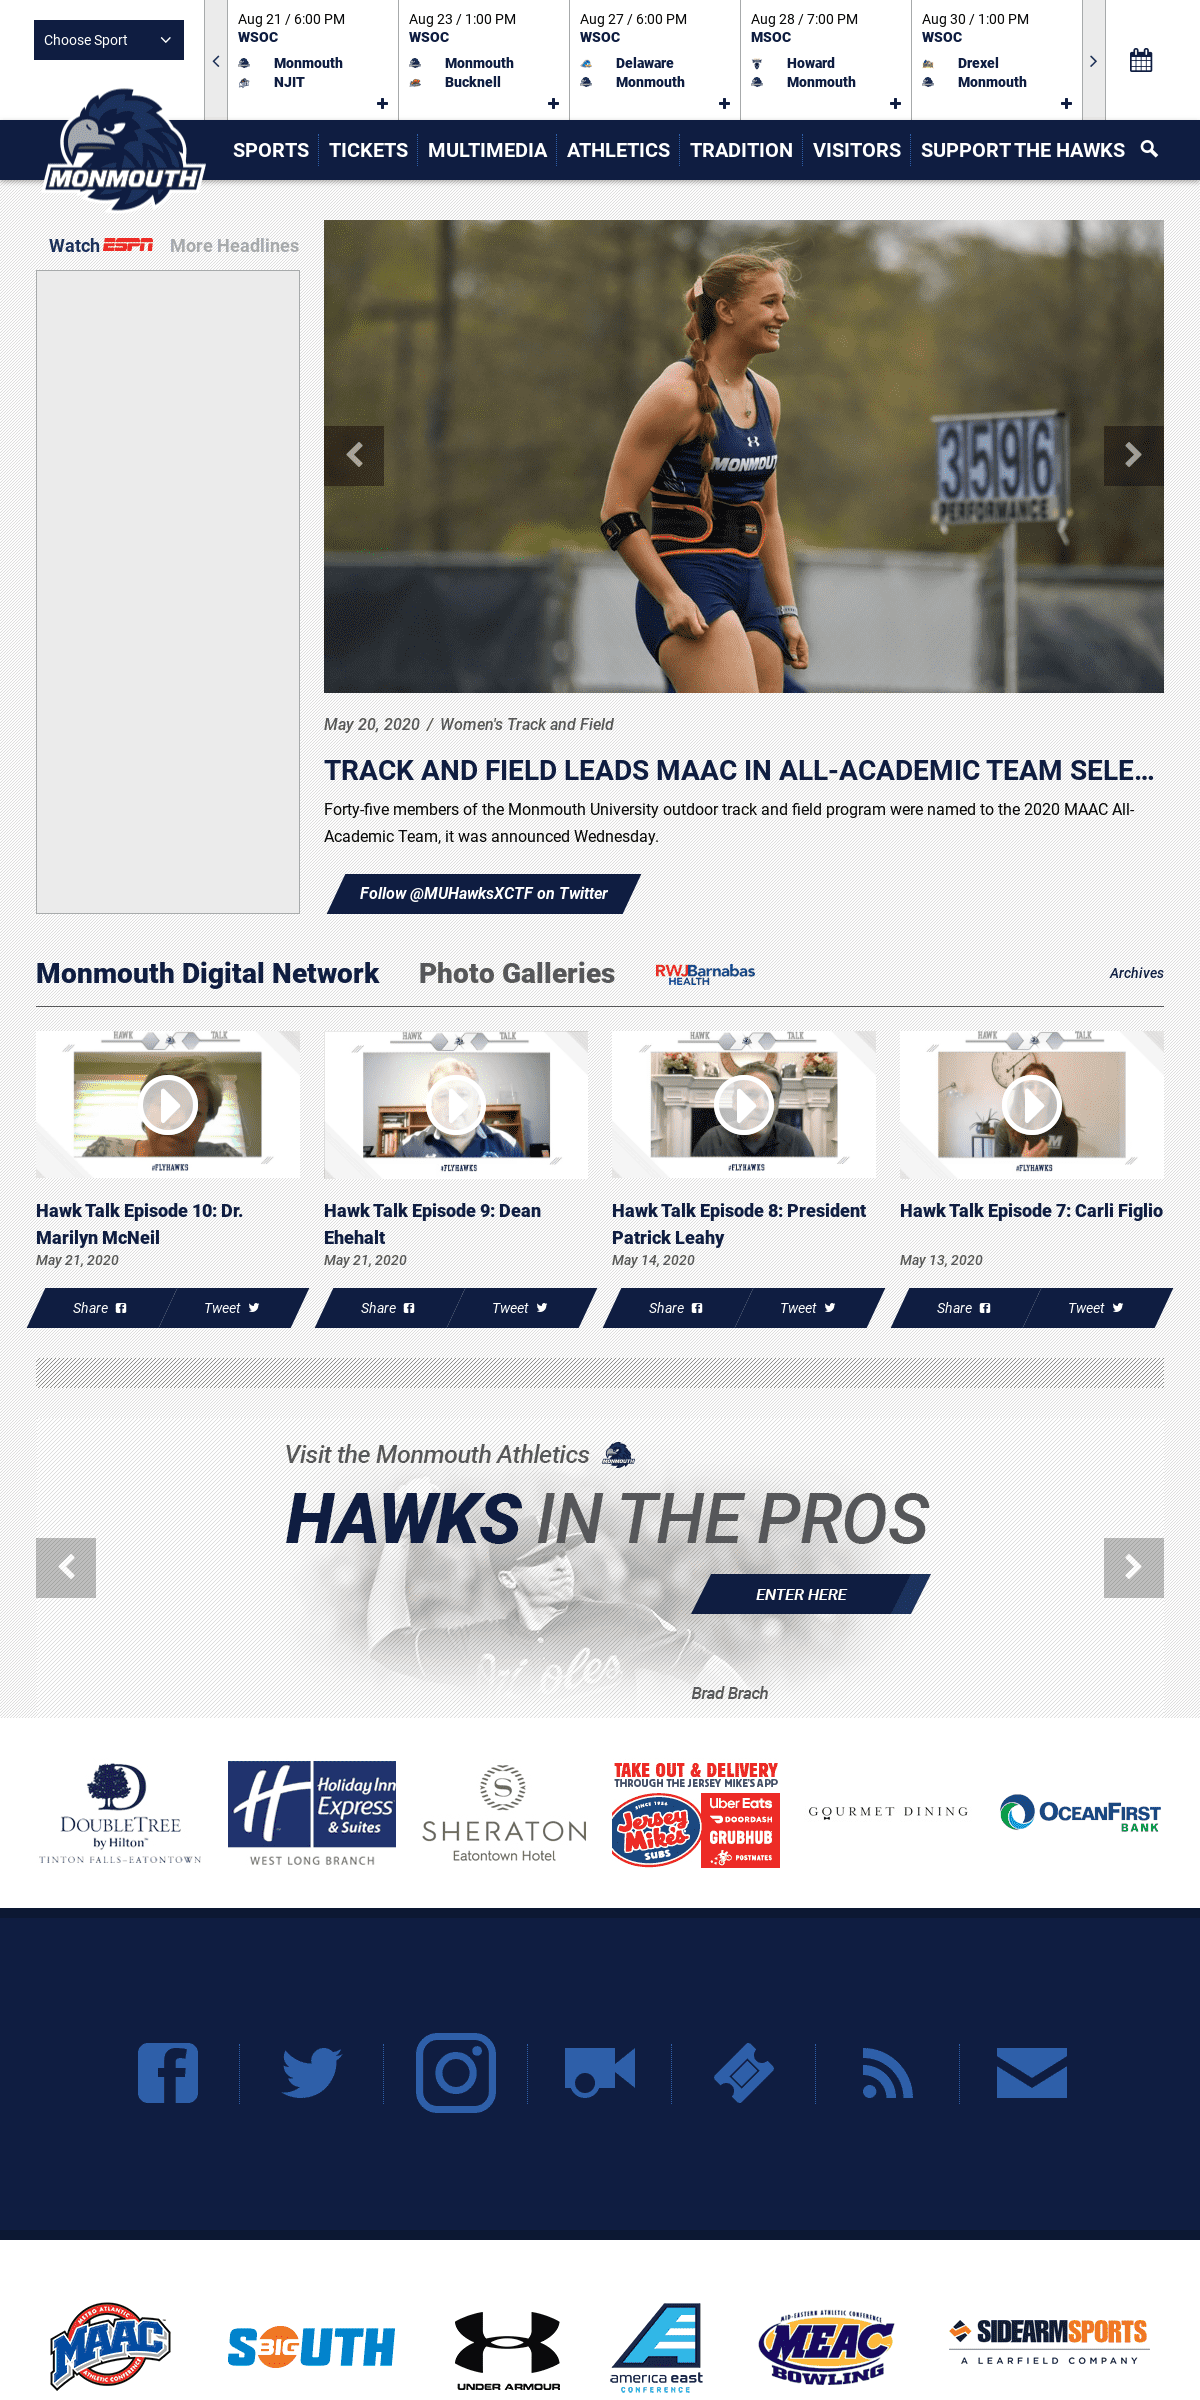 A complete backup of monmouthhawks.com